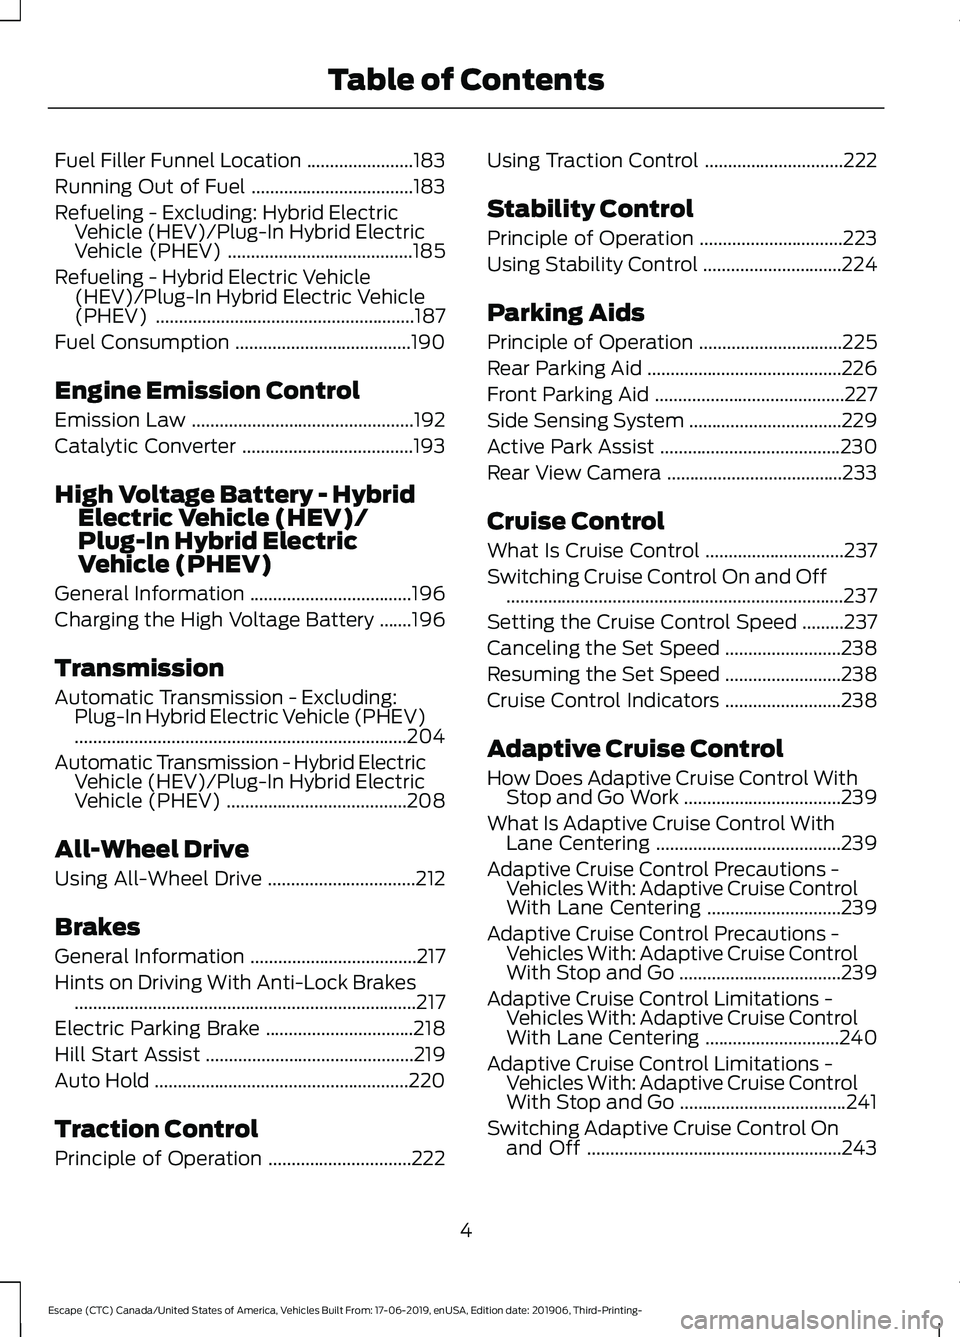 FORD ESCAPE 2020  Owners Manual Fuel Filler Funnel Location
.......................183
Running Out of Fuel ...................................
183
Refueling - Excluding: Hybrid Electric Vehicle (HEV)/Plug-In Hybrid Electric
Vehicle 